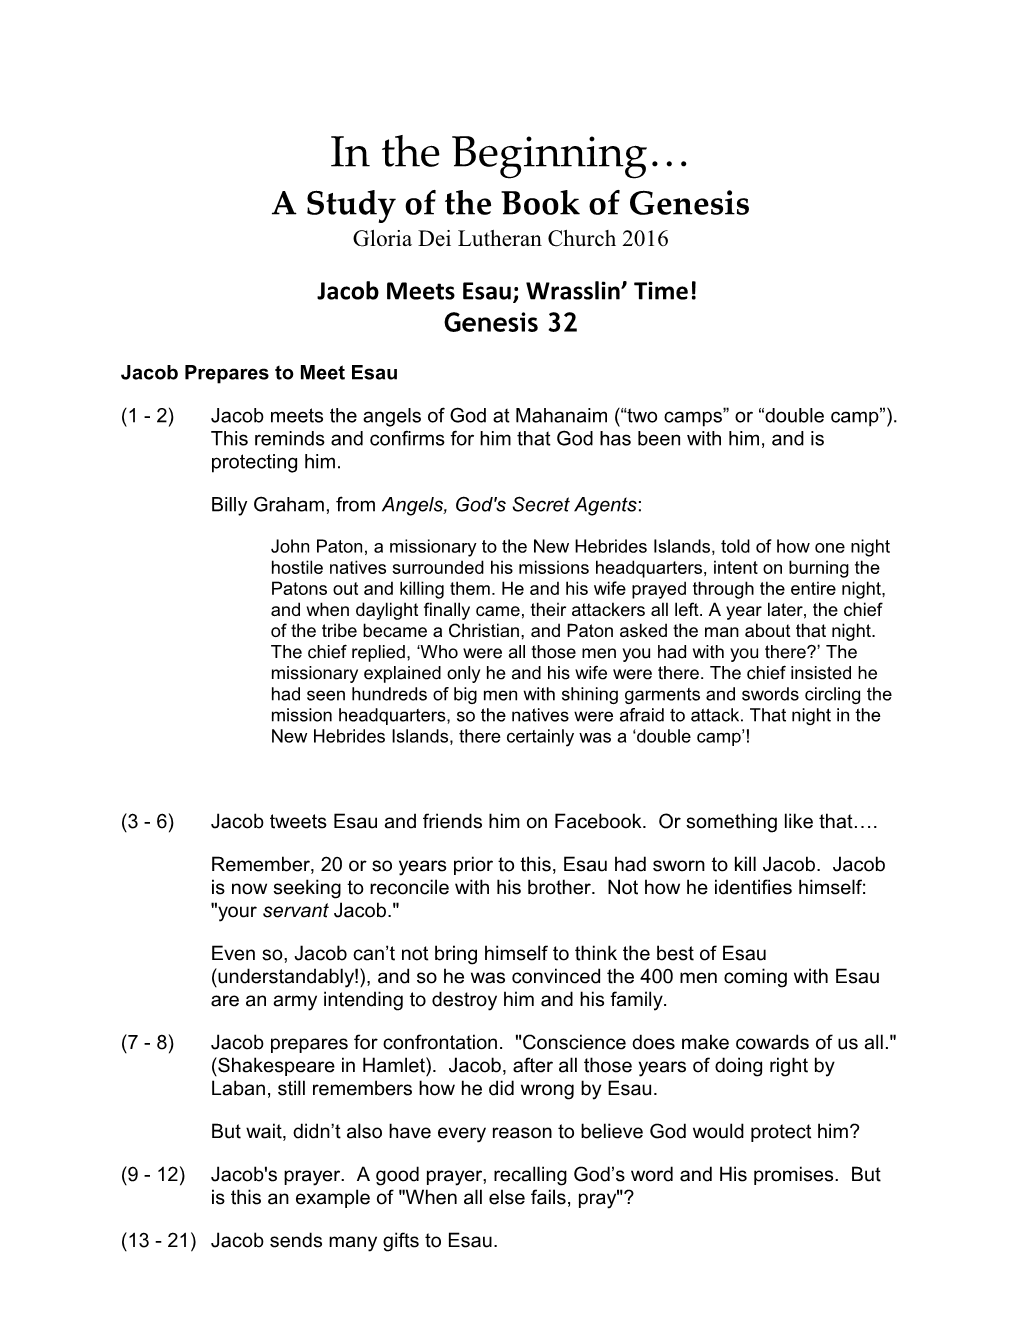 A Study of the Book of Genesis